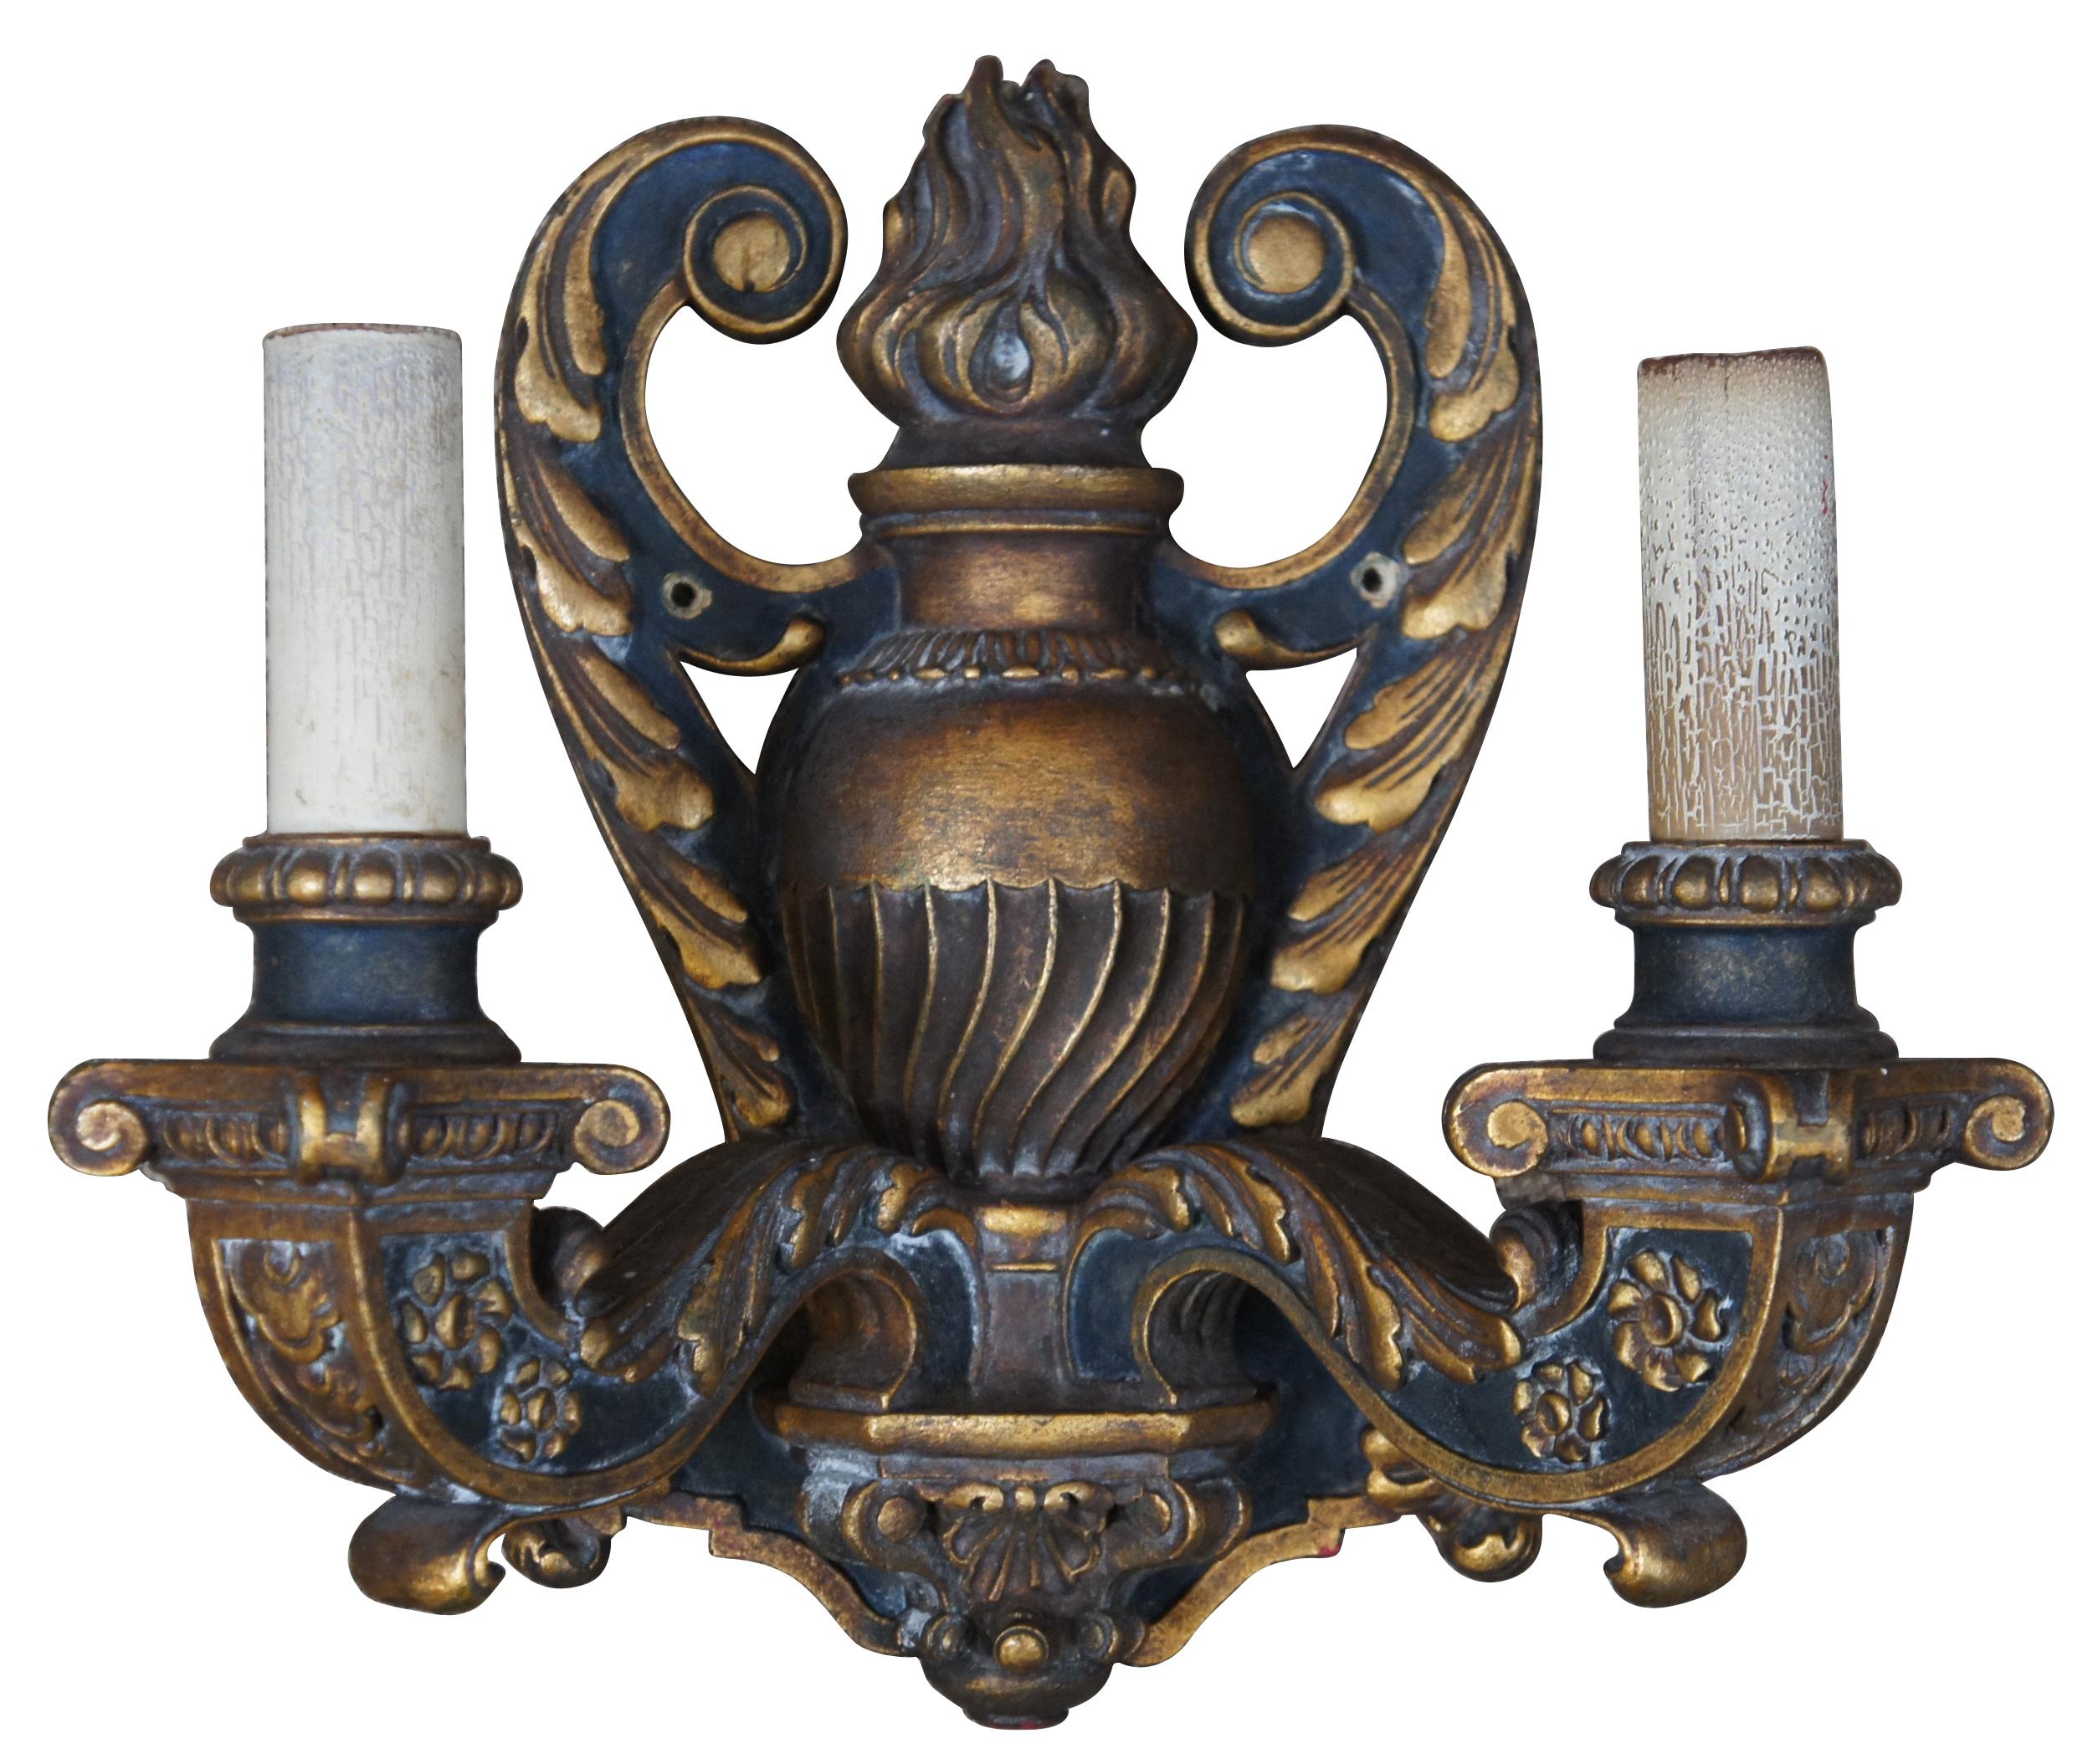 Circa 1910 Baroque Revival electric wall sconces in the shape of black and gold (Dore) wall mounted candlesticks decorated with leaves, flowers and a flaming urn.
 